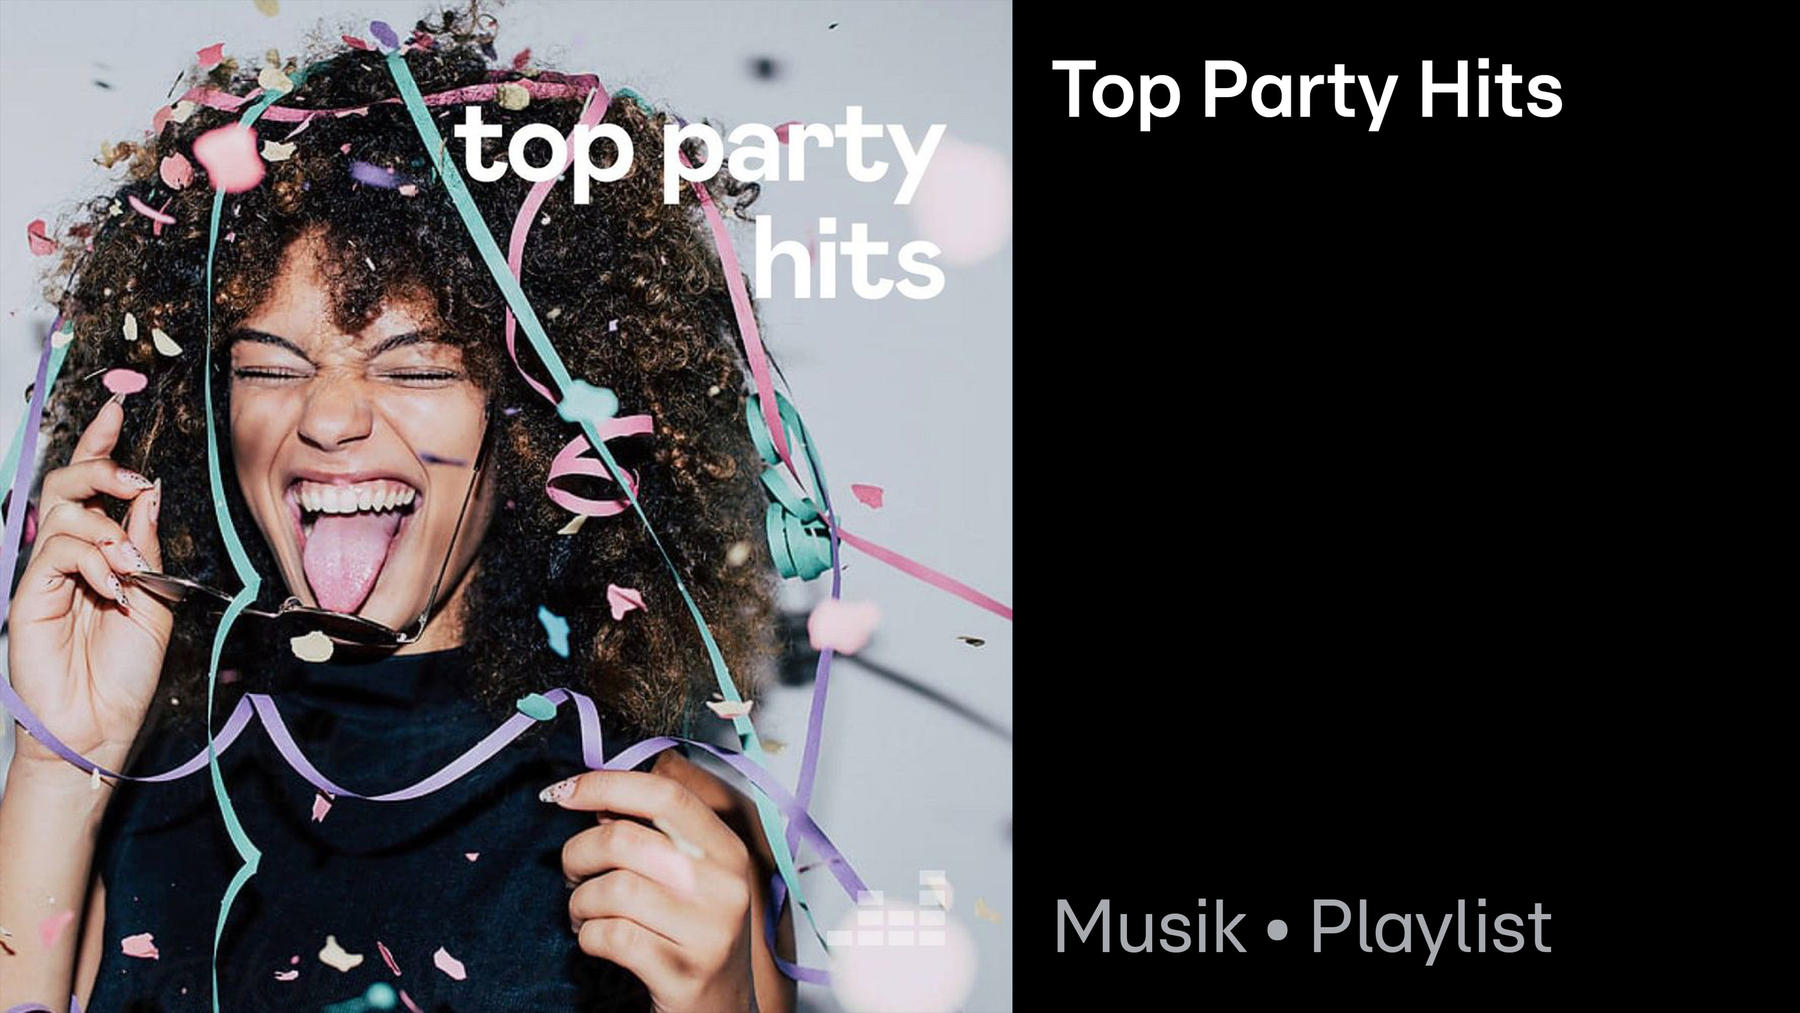 Top Party Hits Playlist